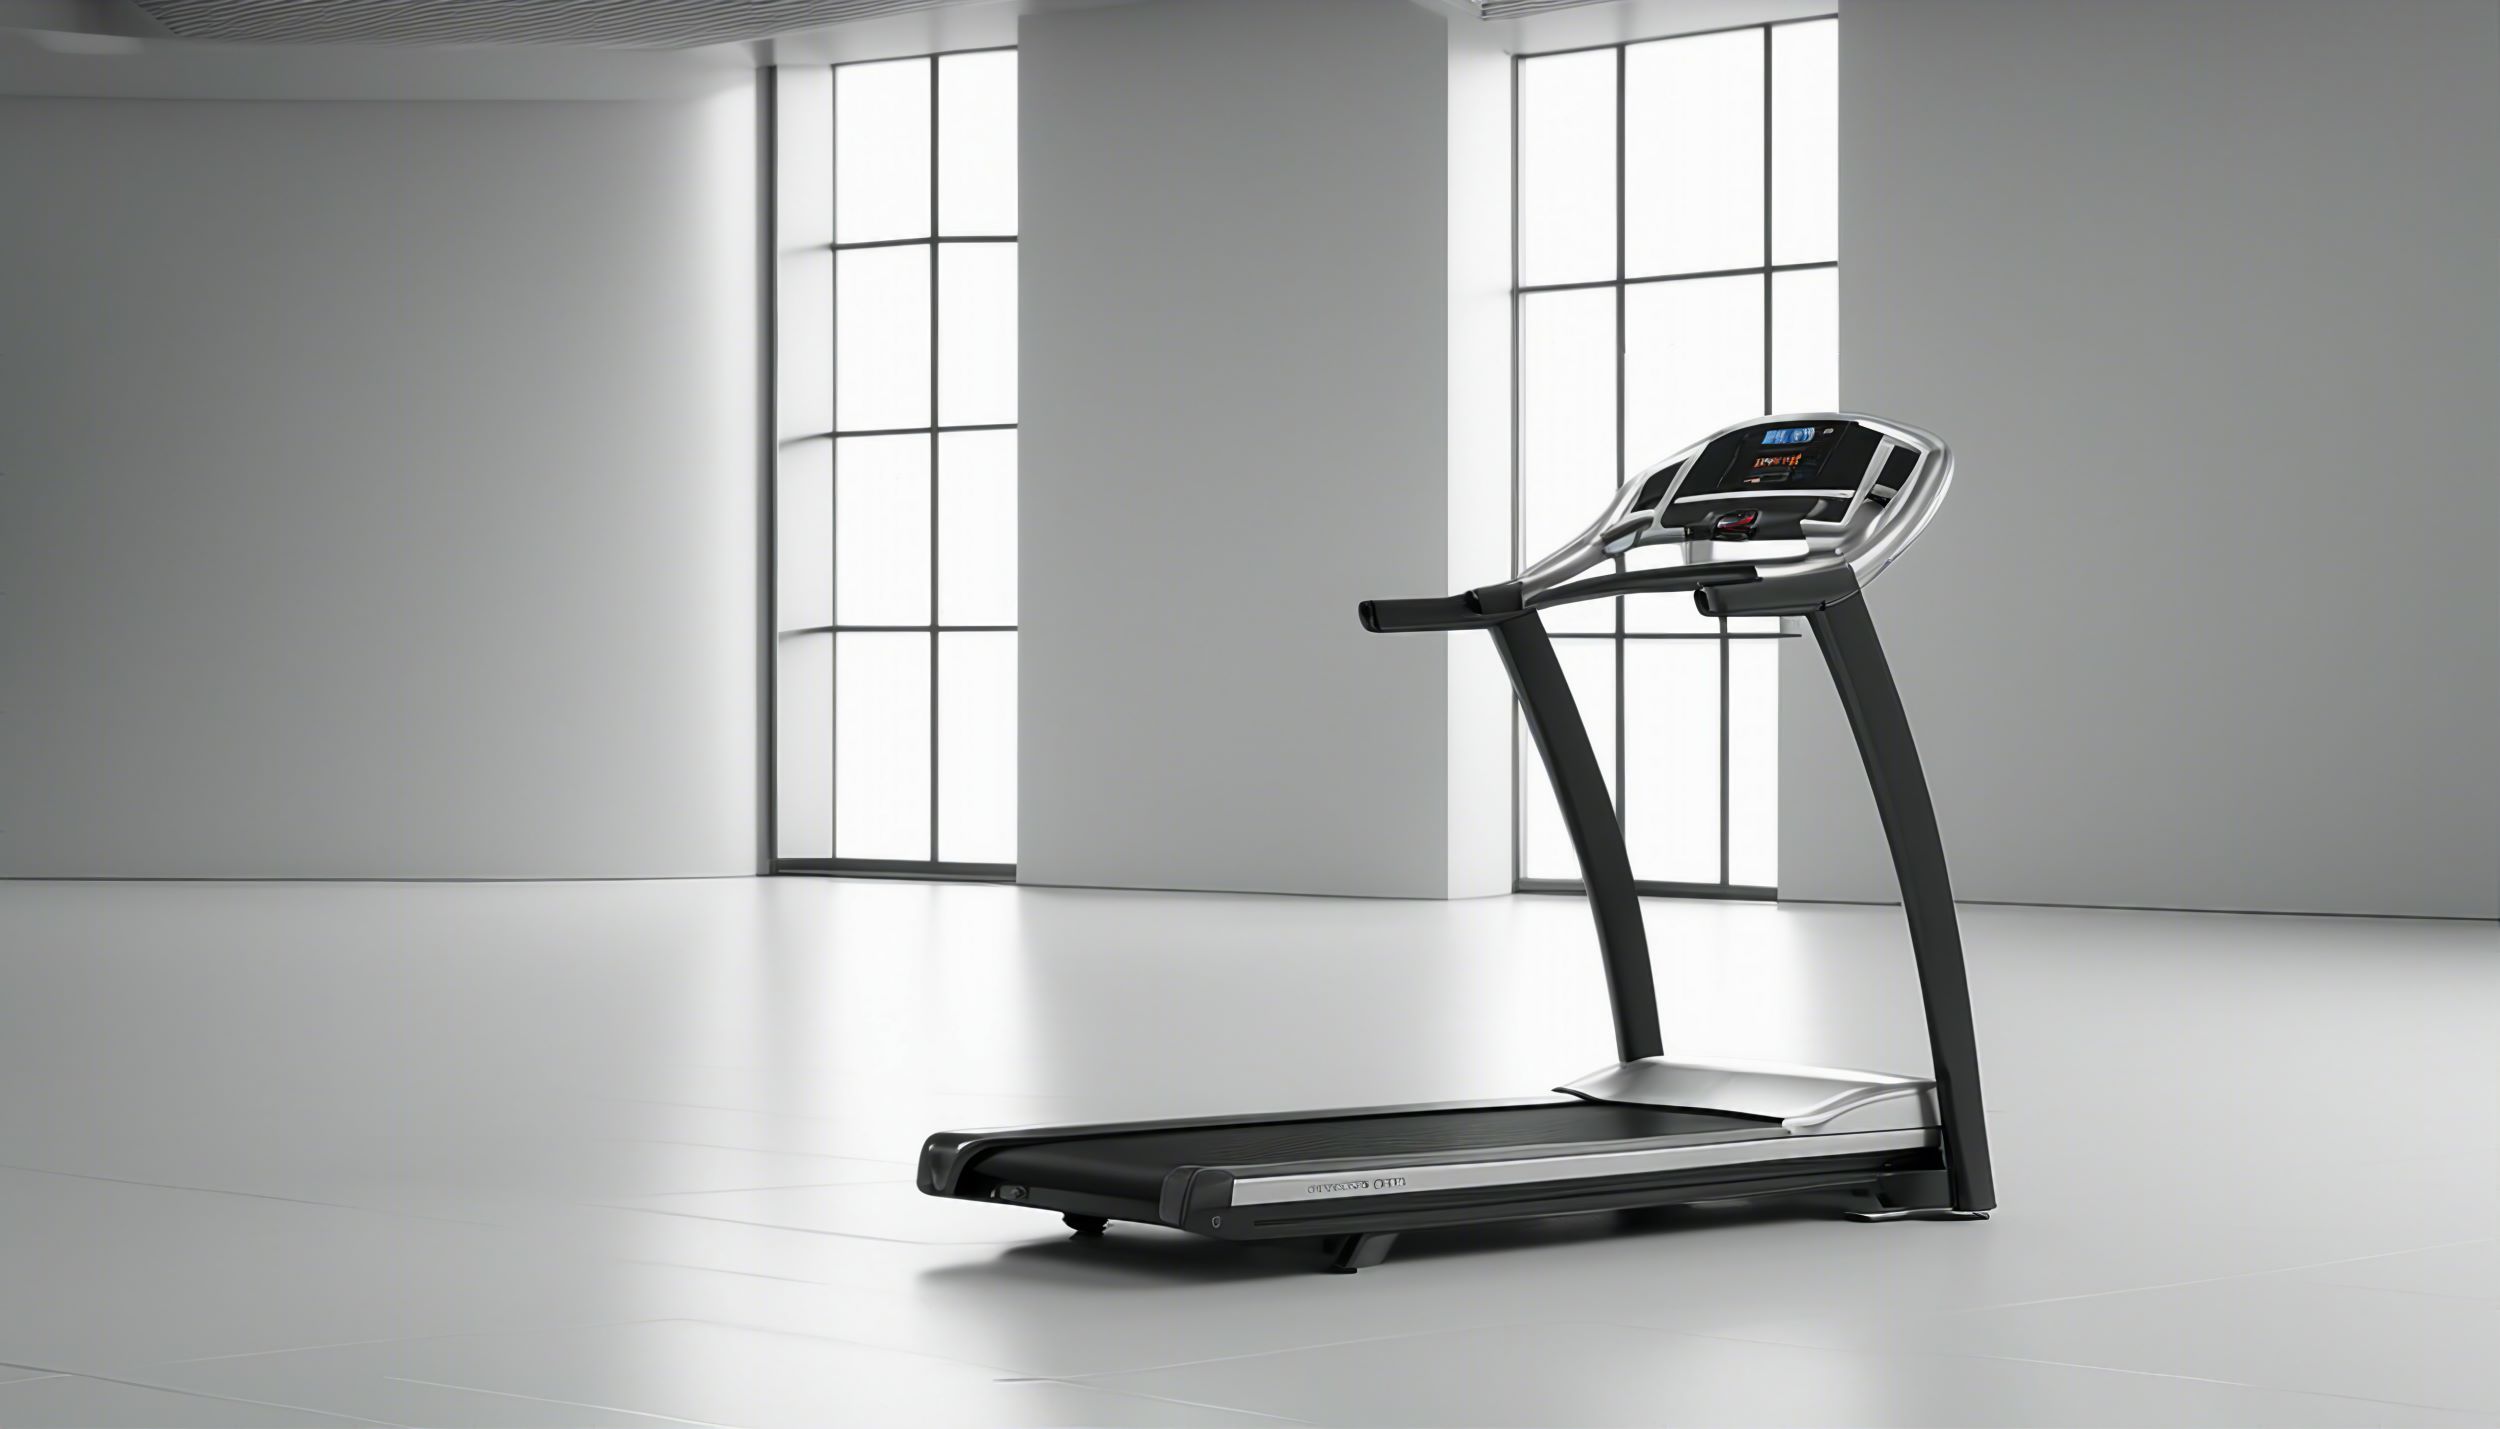 A treadmill in a room with windows.